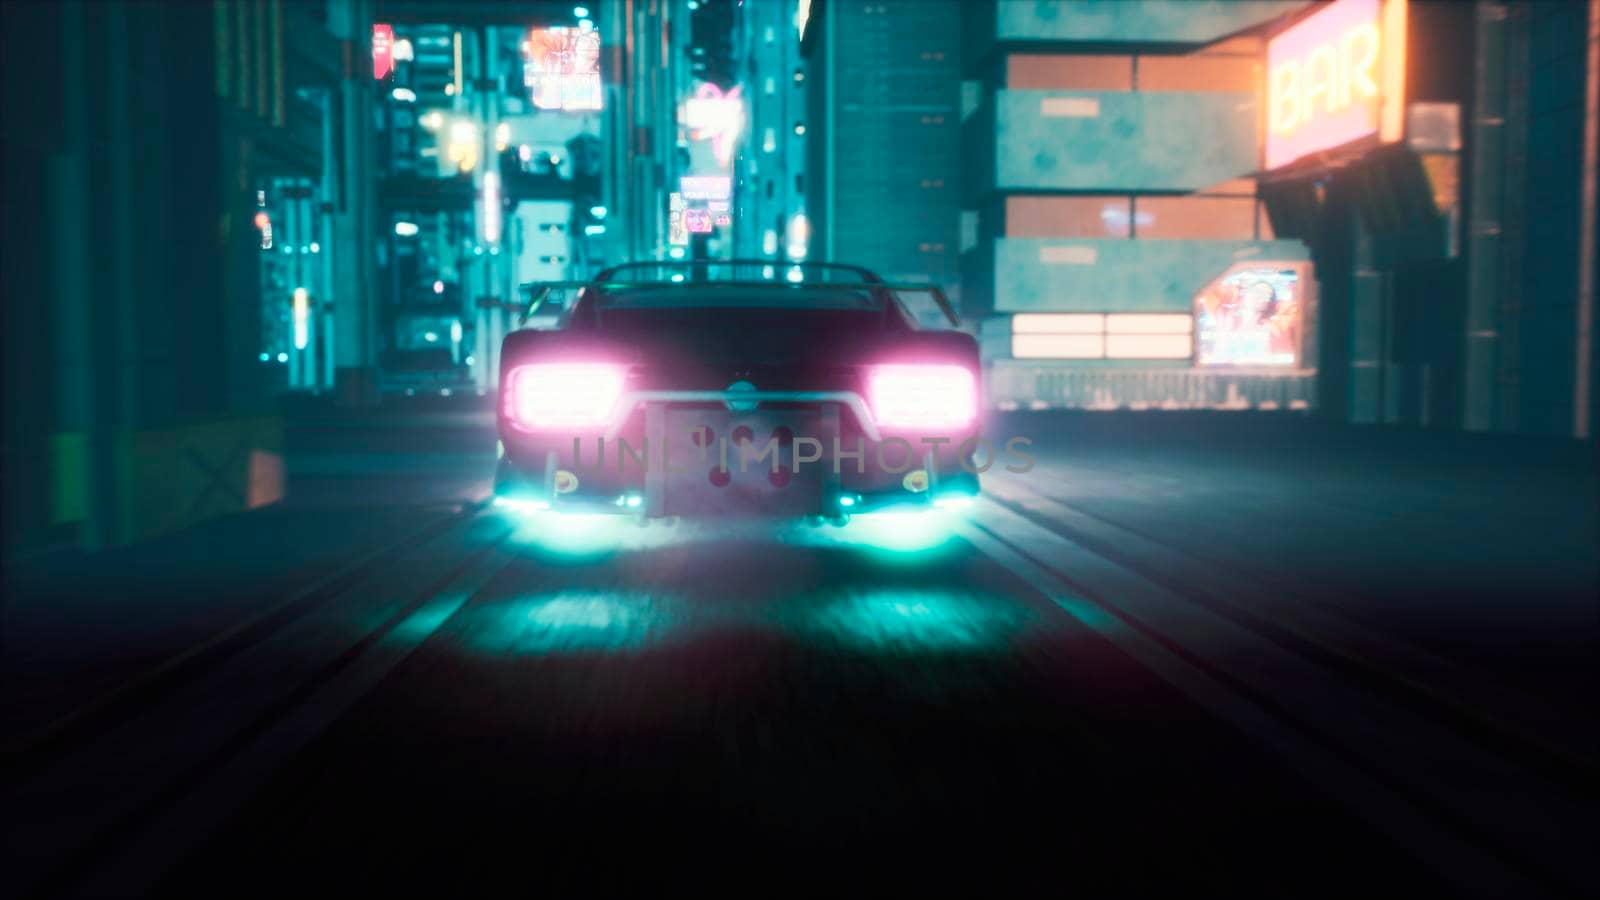 The flying car of the future rushes through the neon street of the cyber city. Sci-fi cyber world concept.